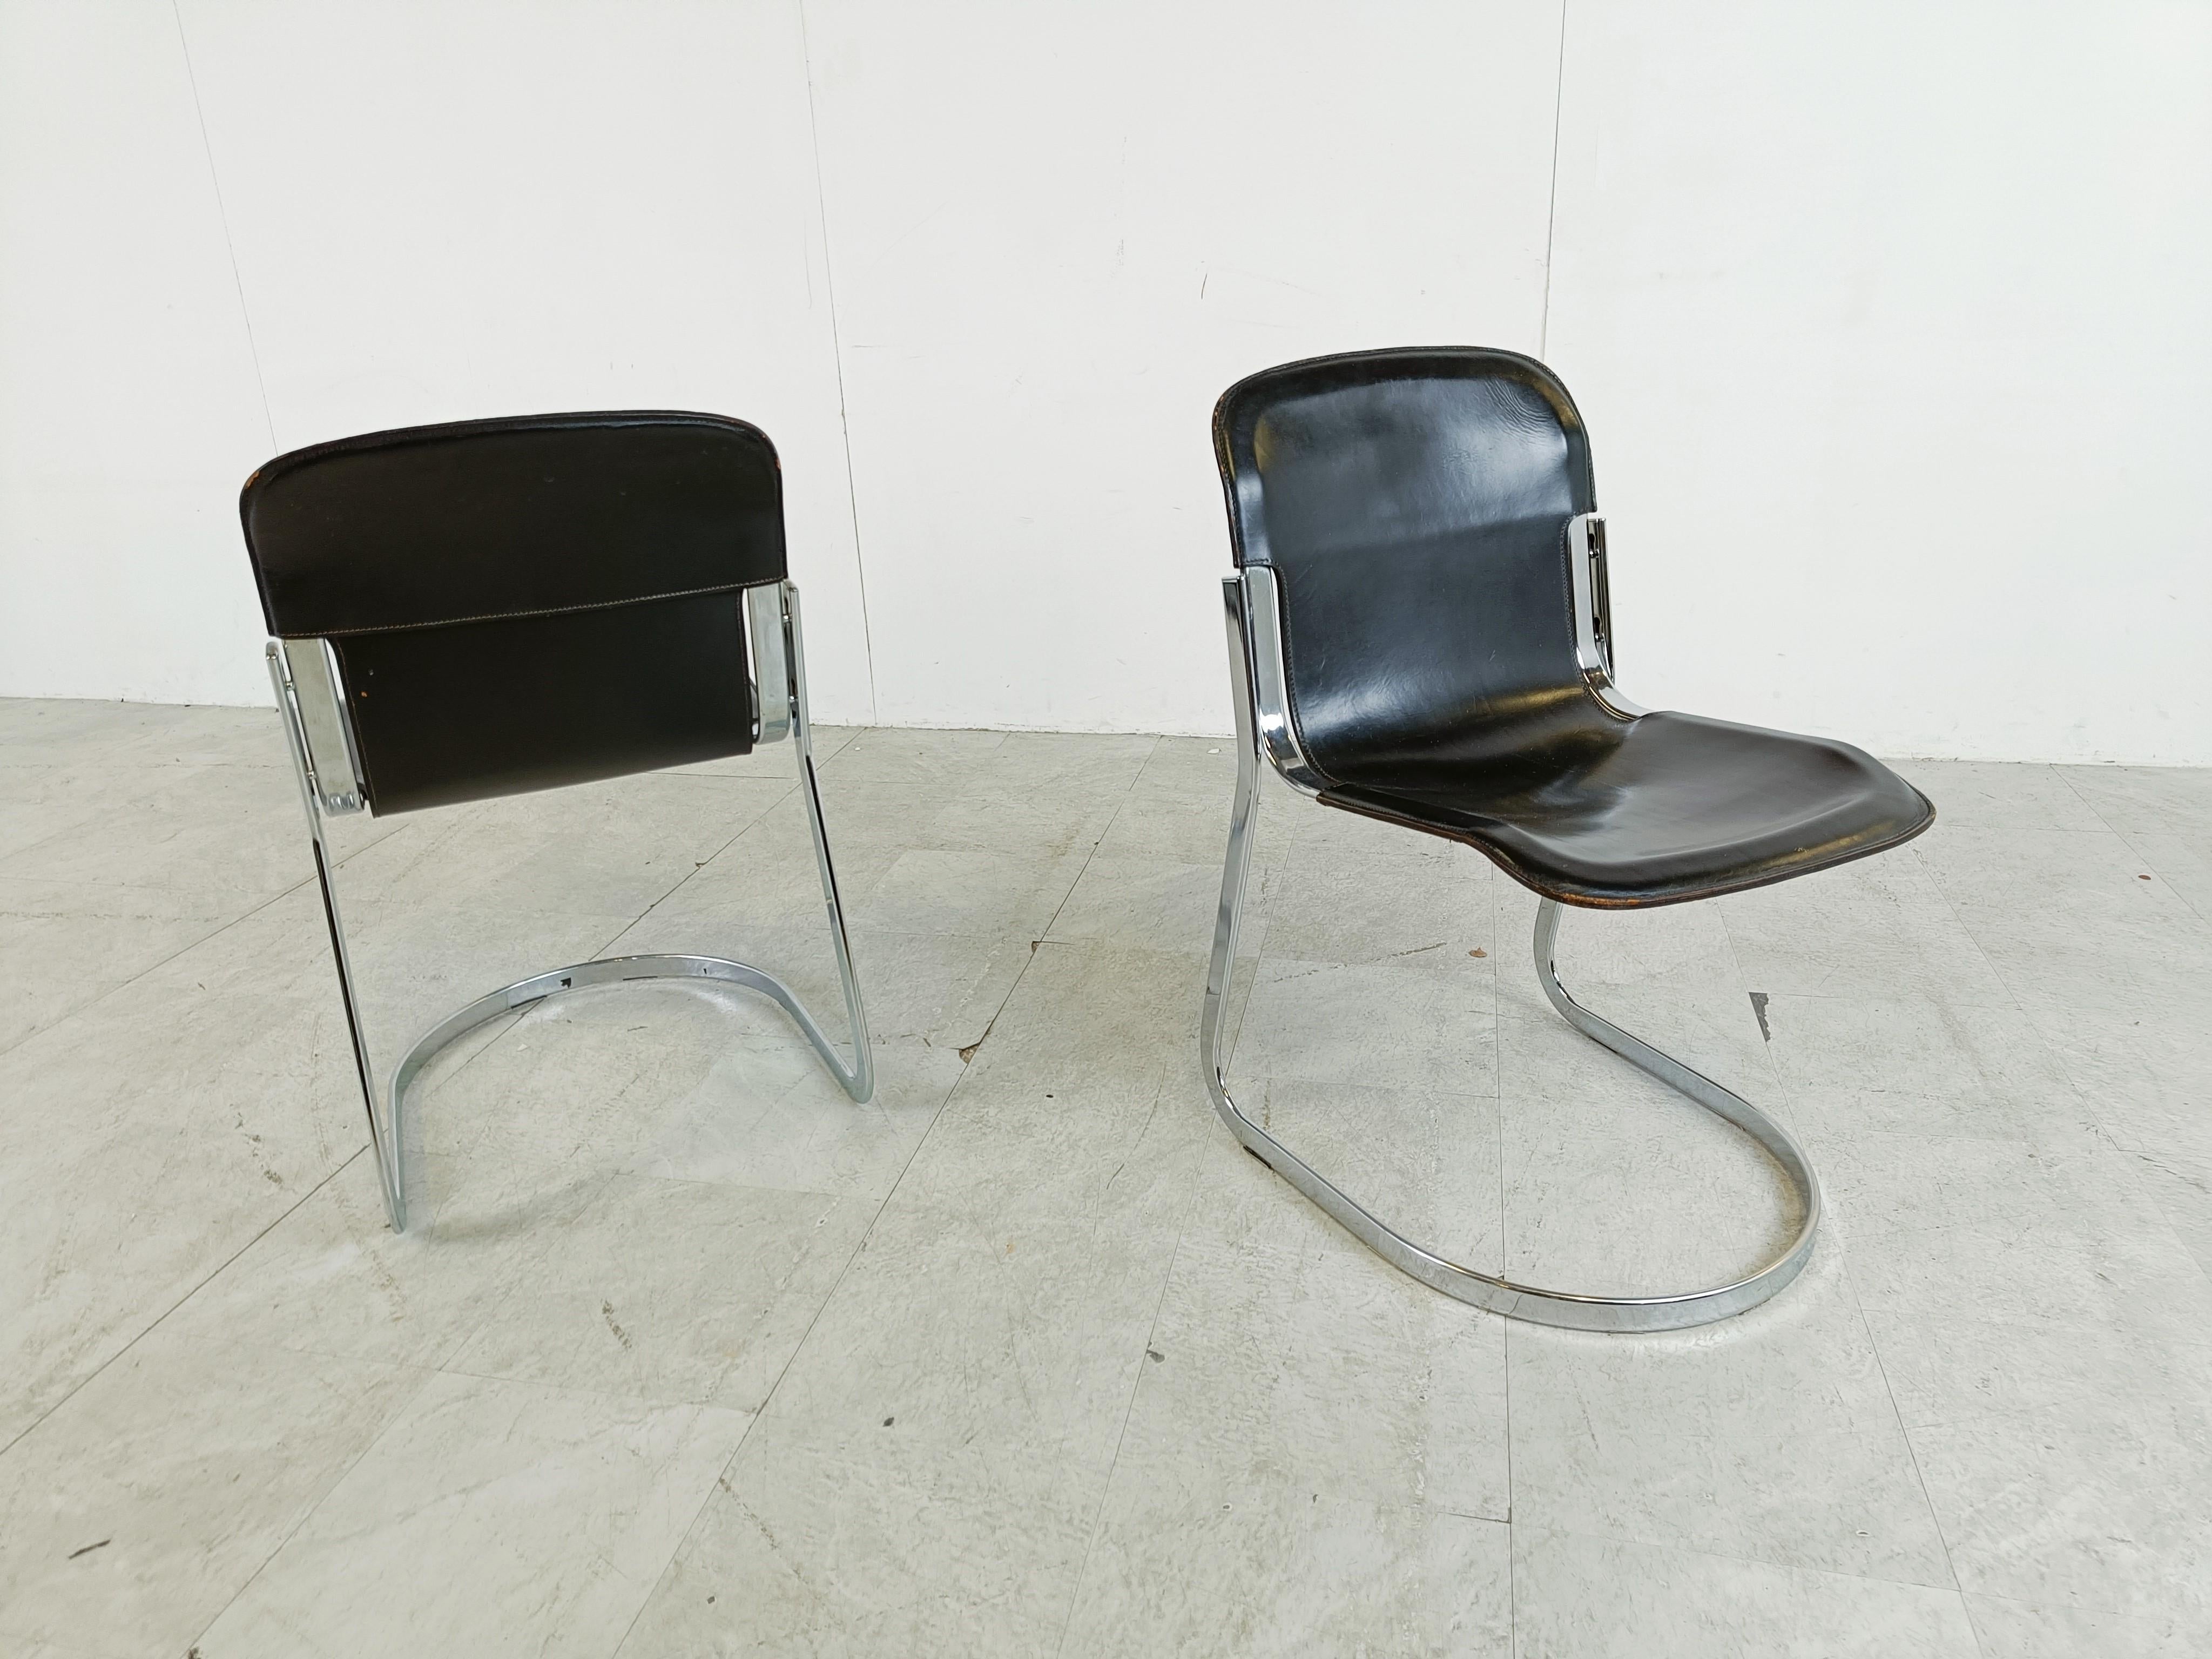 Set of 6 dining chairs designed by Willy Rizzo for Cidue.

The chairs have a beautyfully shaped chrome frame and come with the original black leather seats.

Good condition, normal age related wear/patina.

The chairs still look up to date in modern